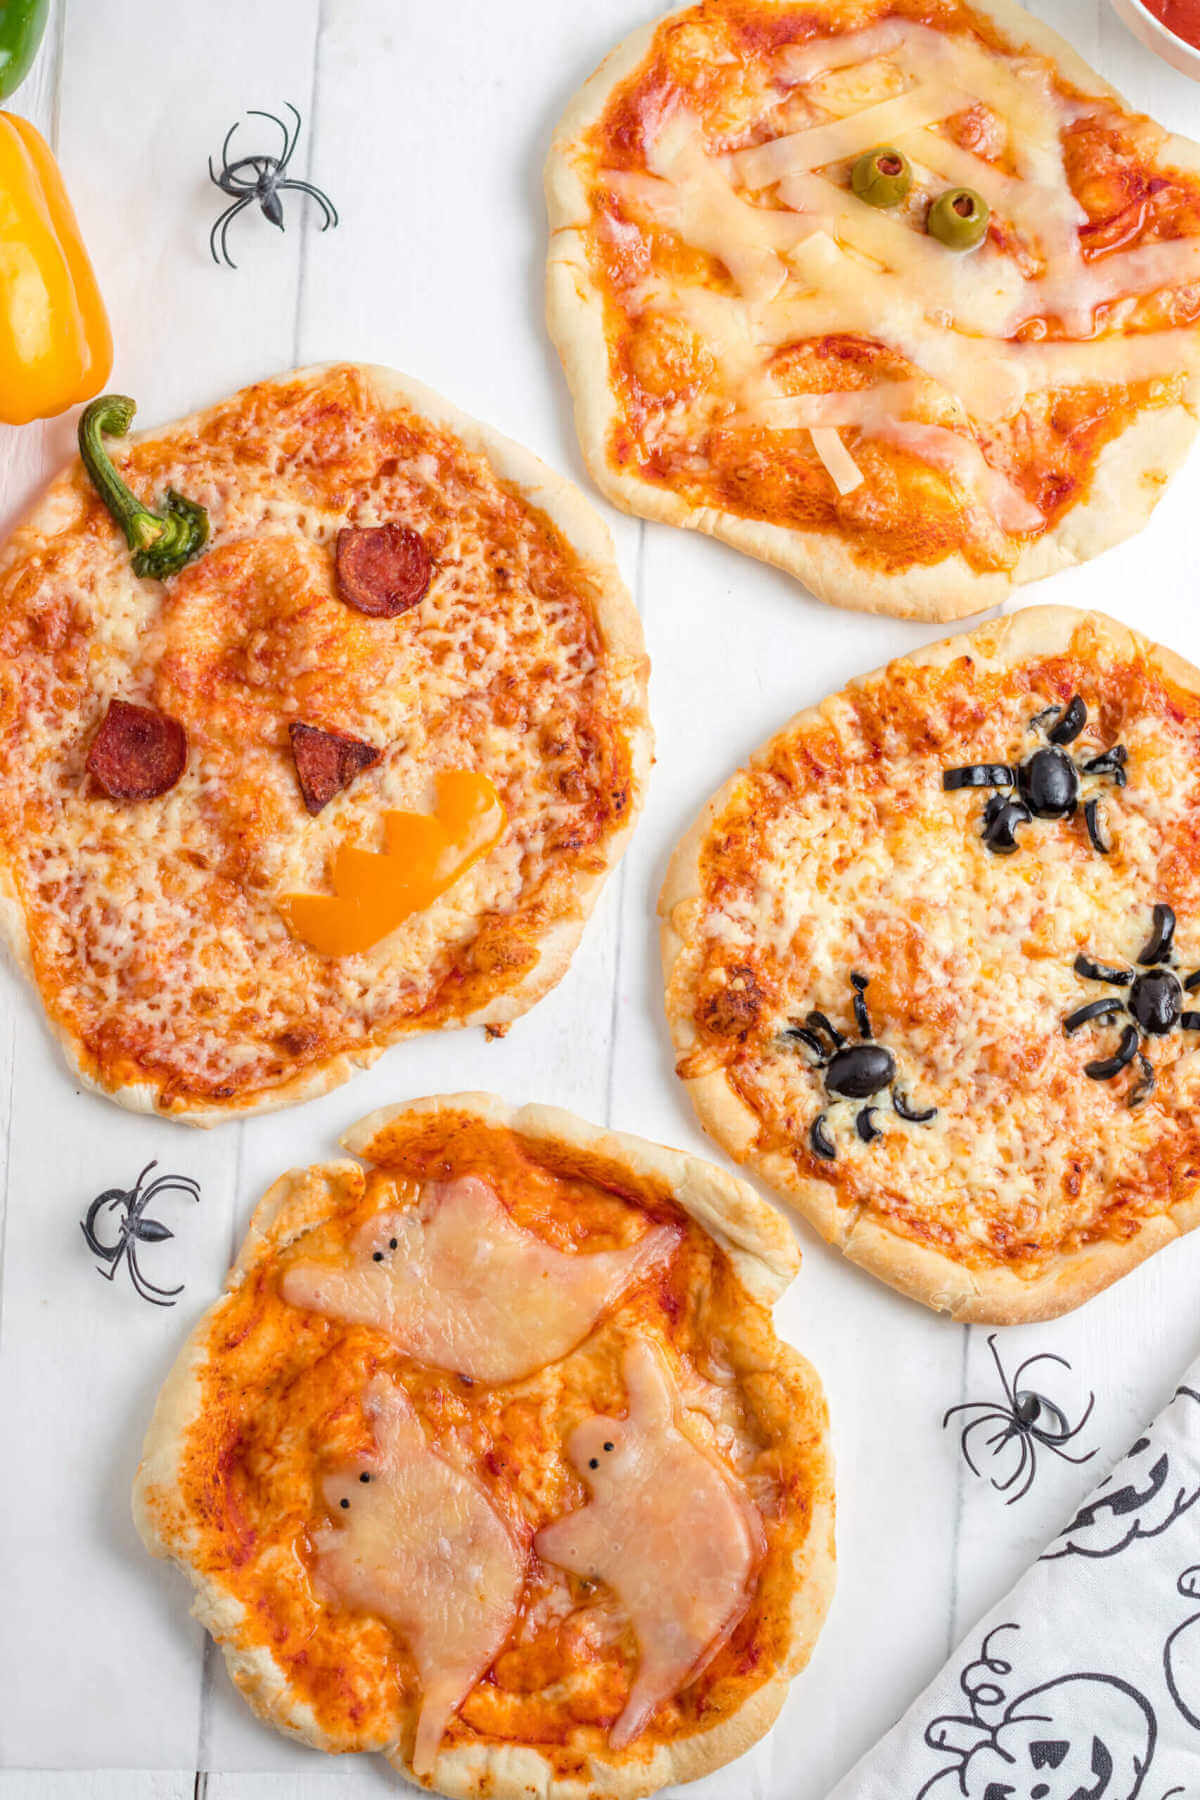 Four pizzas decorated with Halloween characters of ghosts, jack-0-lantern, spiders, and mummies. 